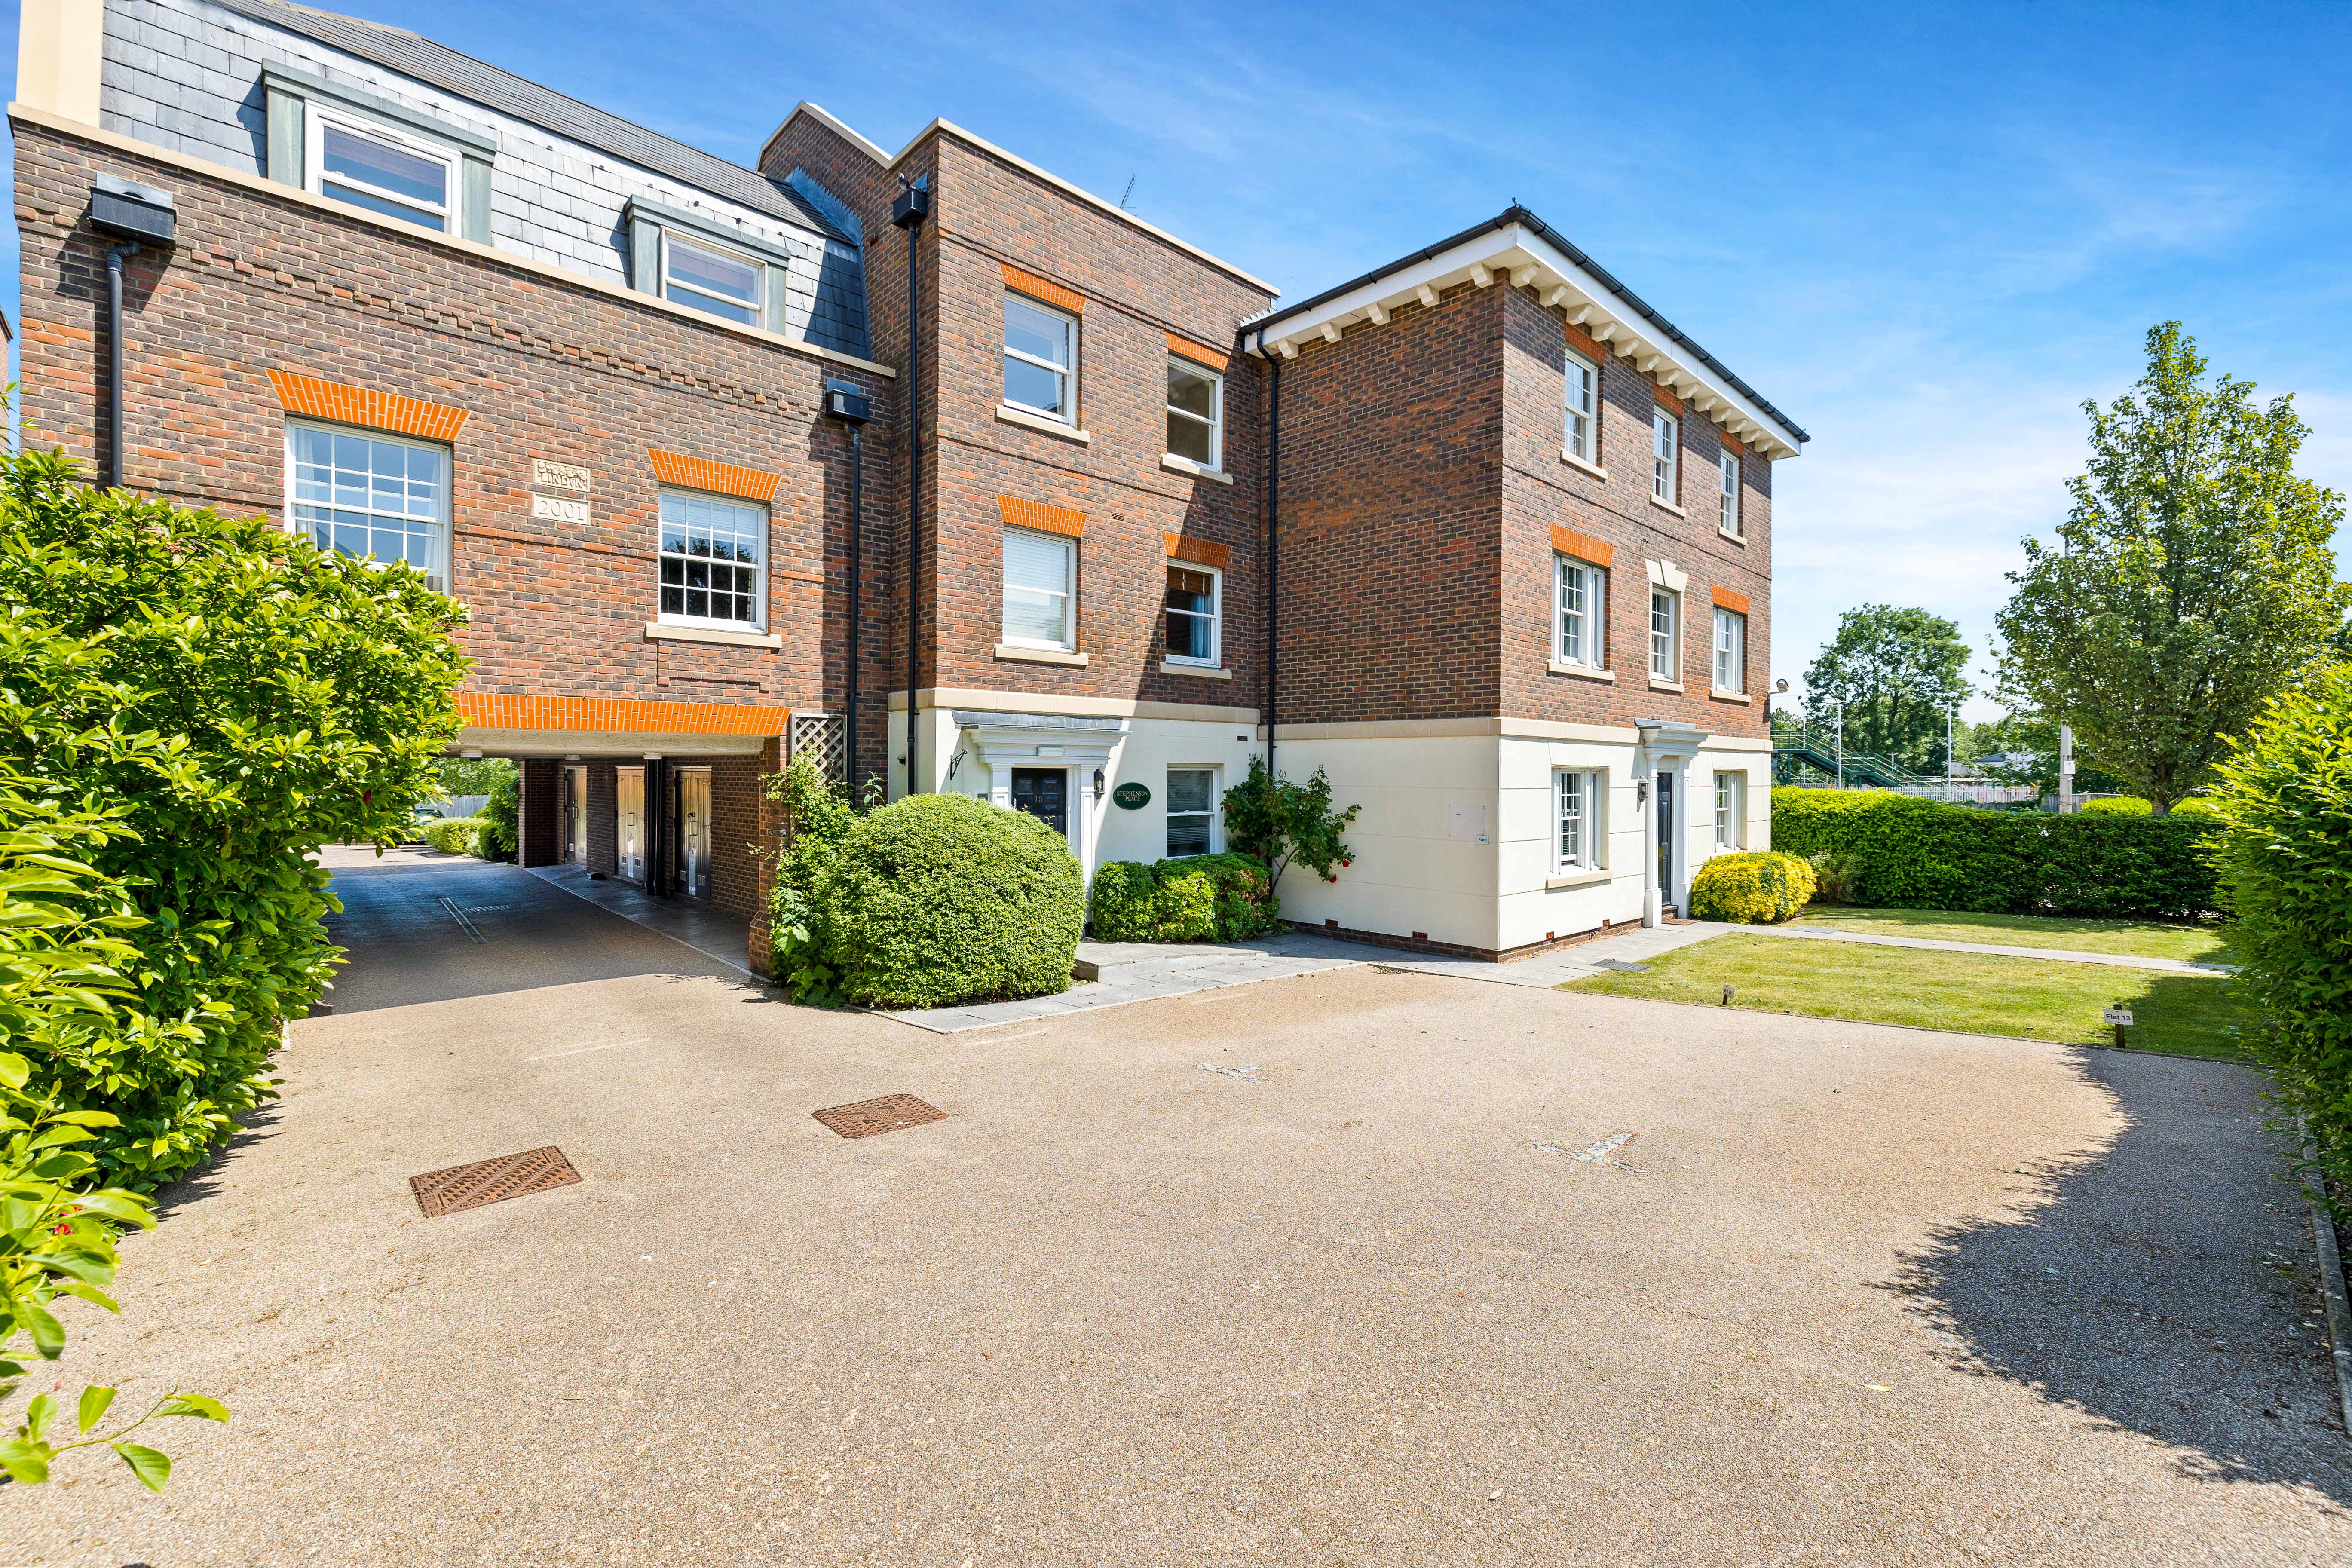 3 bed Apartment for rent in Merstham. From Power Bespoke